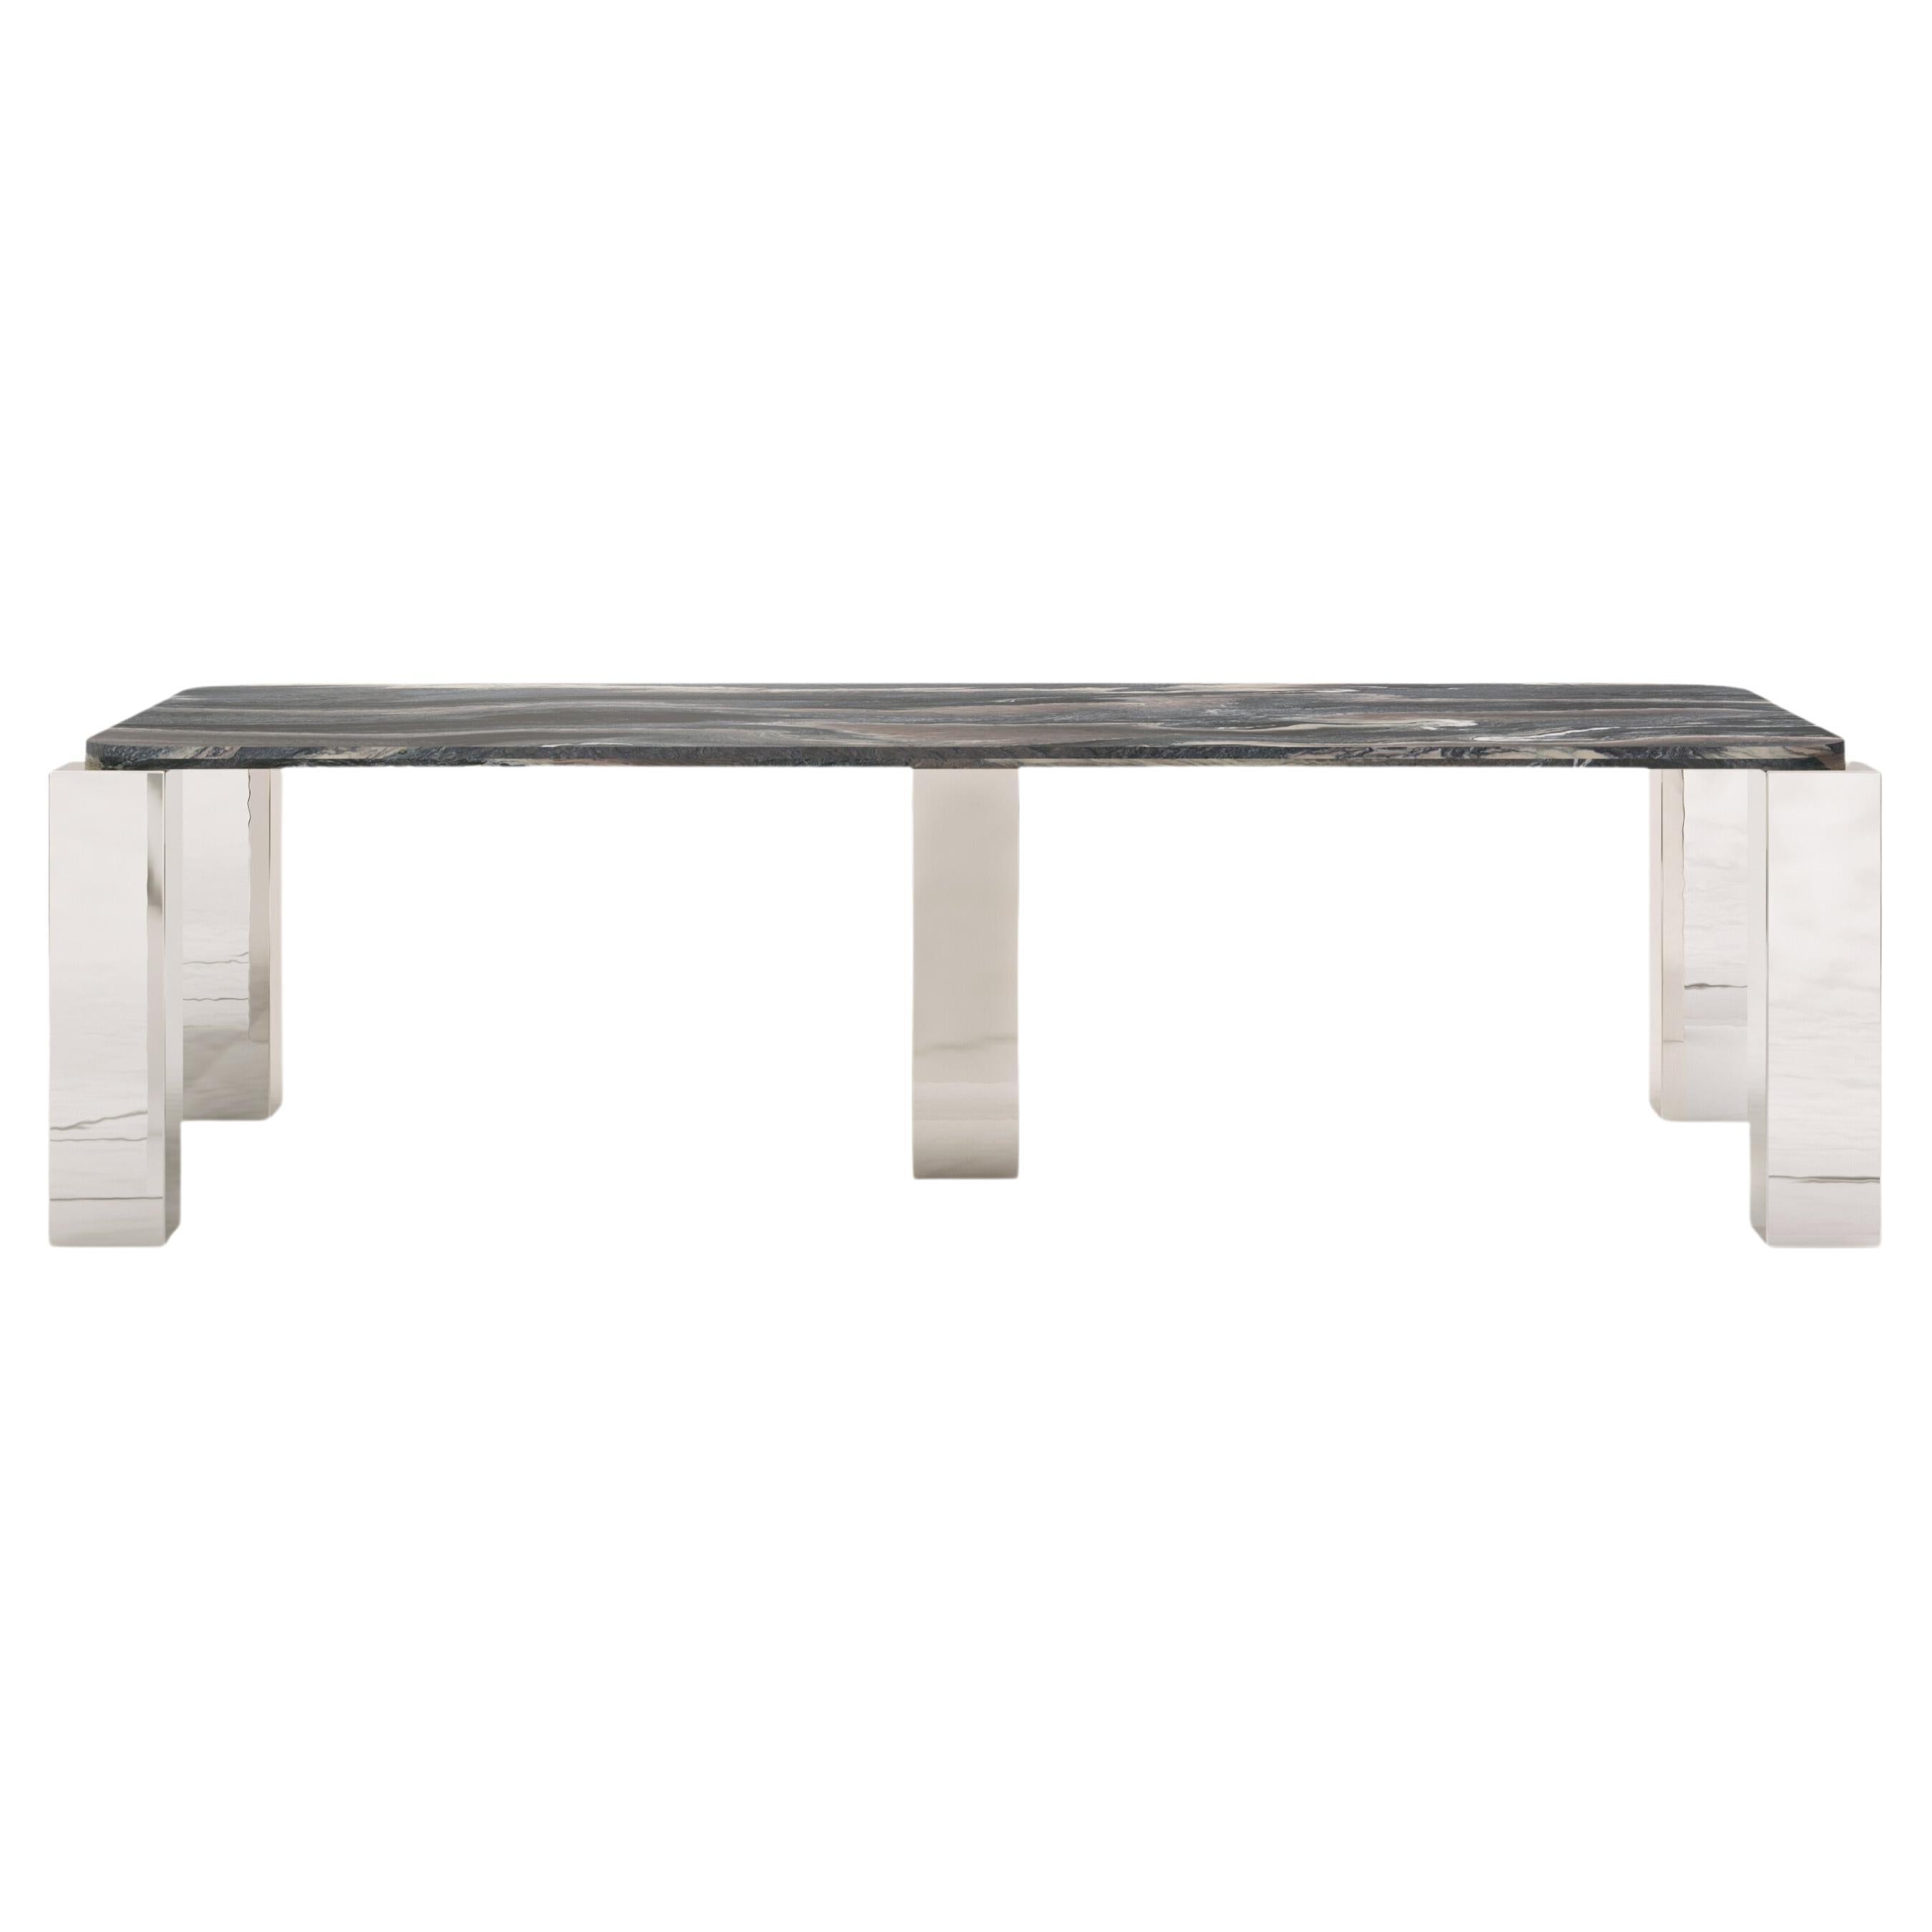 FORM(LA) Cubo Rectangle Dining Table 120”L x 50”W x 30”H Ondulato Marble/Chrome For Sale